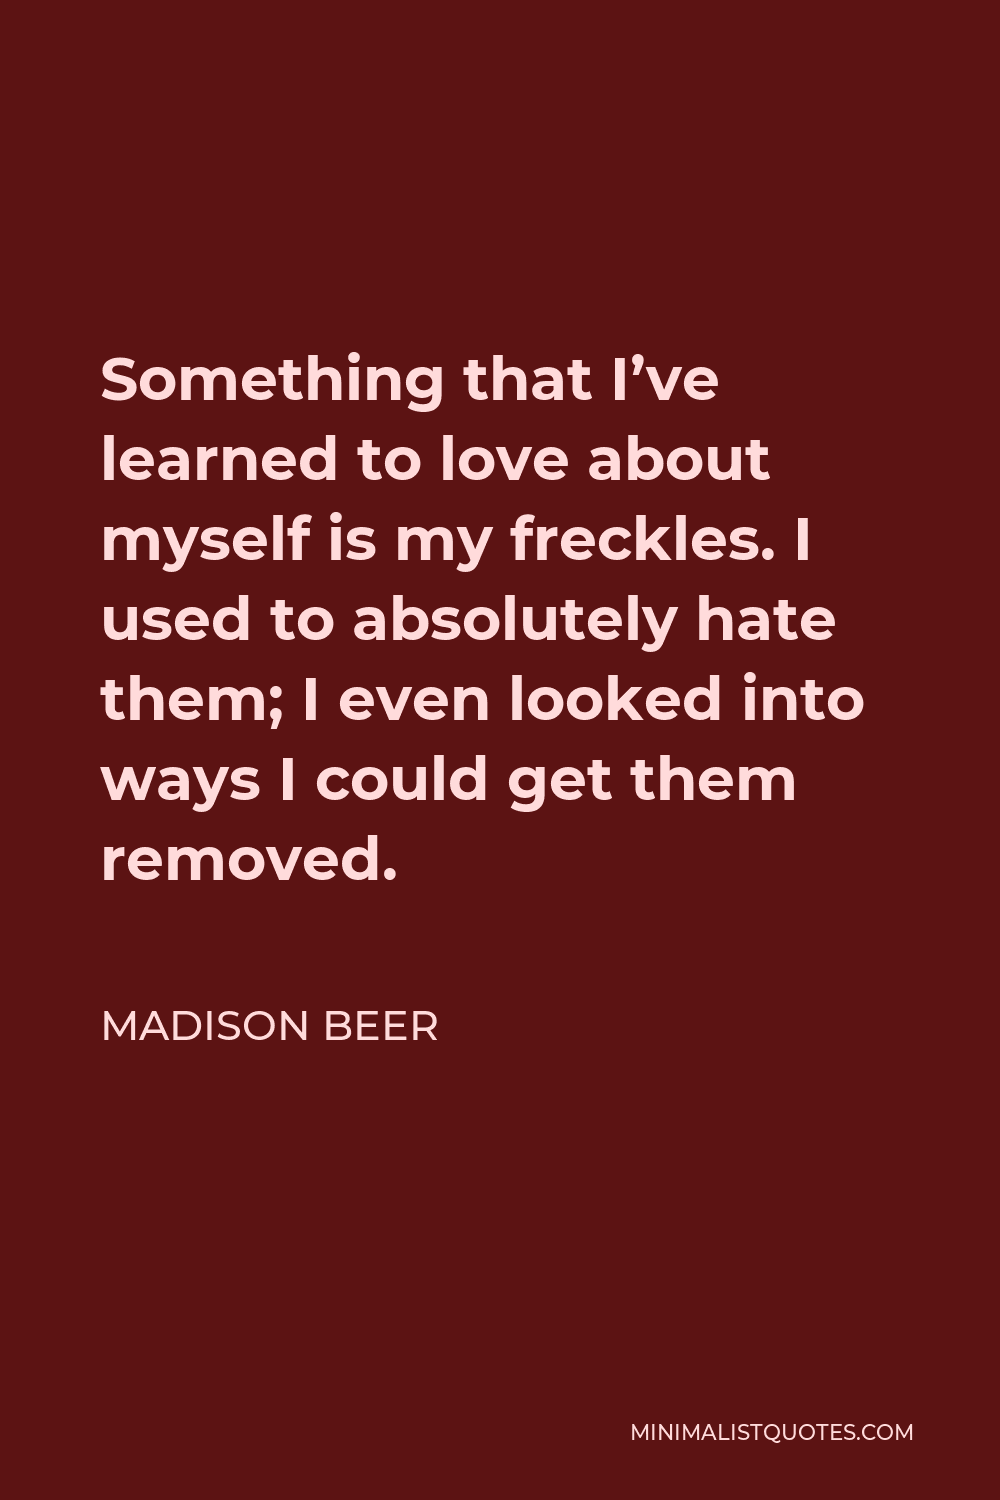 Madison Beer Quote - Something that I’ve learned to love about myself is my freckles. I used to absolutely hate them; I even looked into ways I could get them removed.